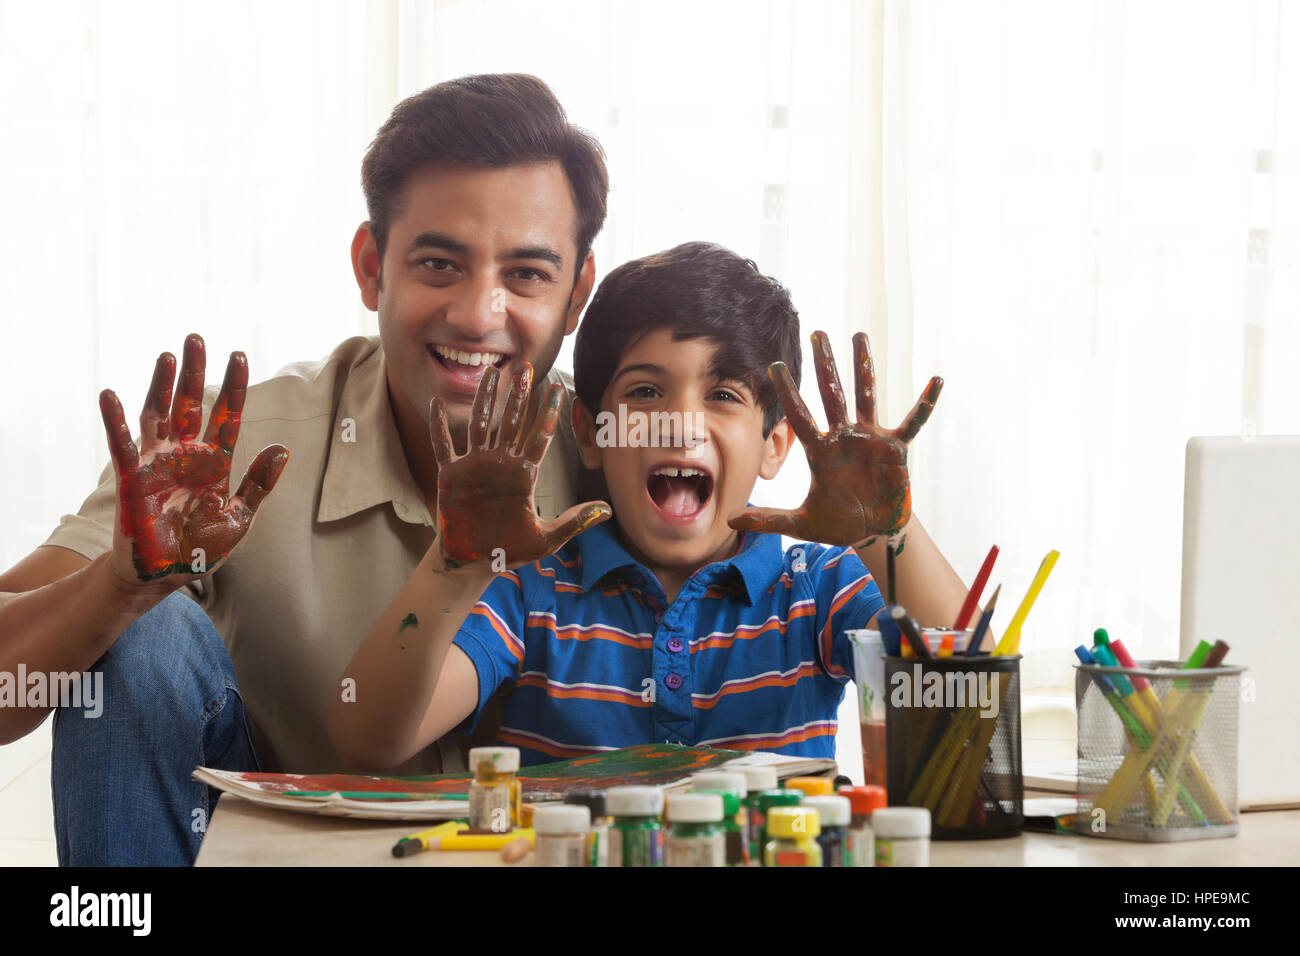 Smiling father and son finger painting together Stock Photo